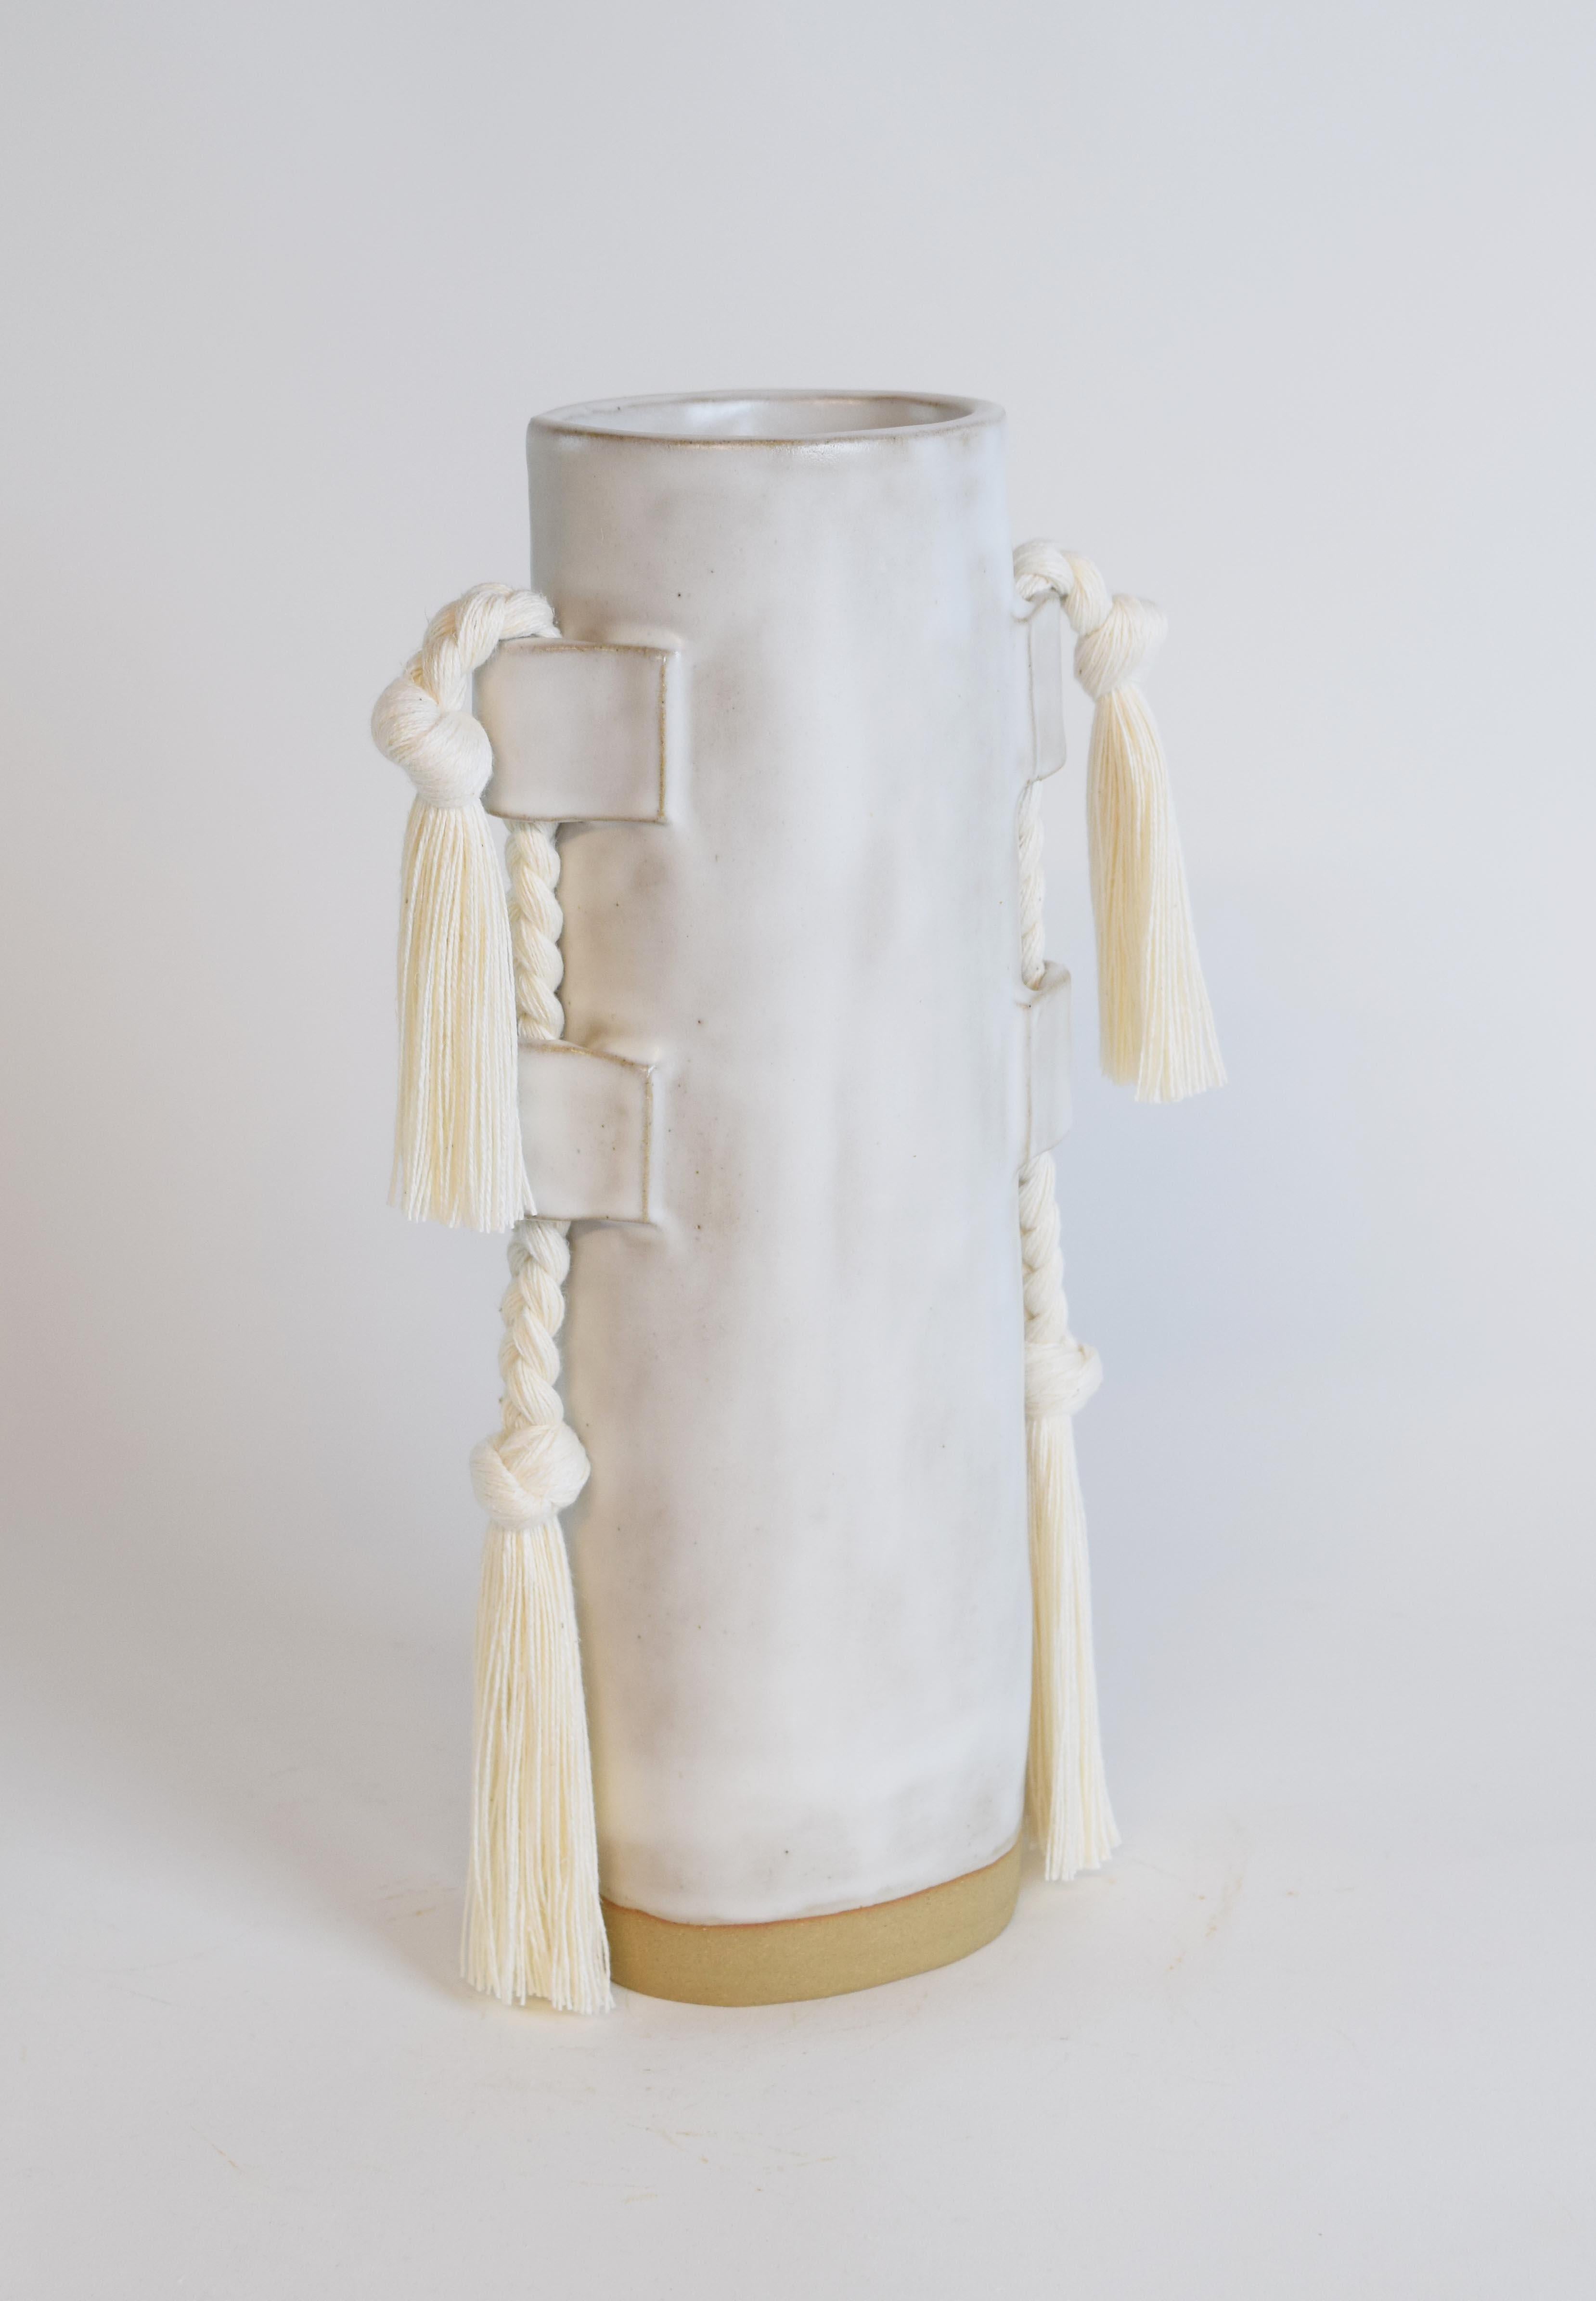 Vase #504 by Karen Gayle Tinney

A fan-favorite since its introduction in 2018, this versatile vase functions equally as a sculptural object and a vessel for flowers.

Hand formed stoneware with satin white White cotton braided details. Inside is